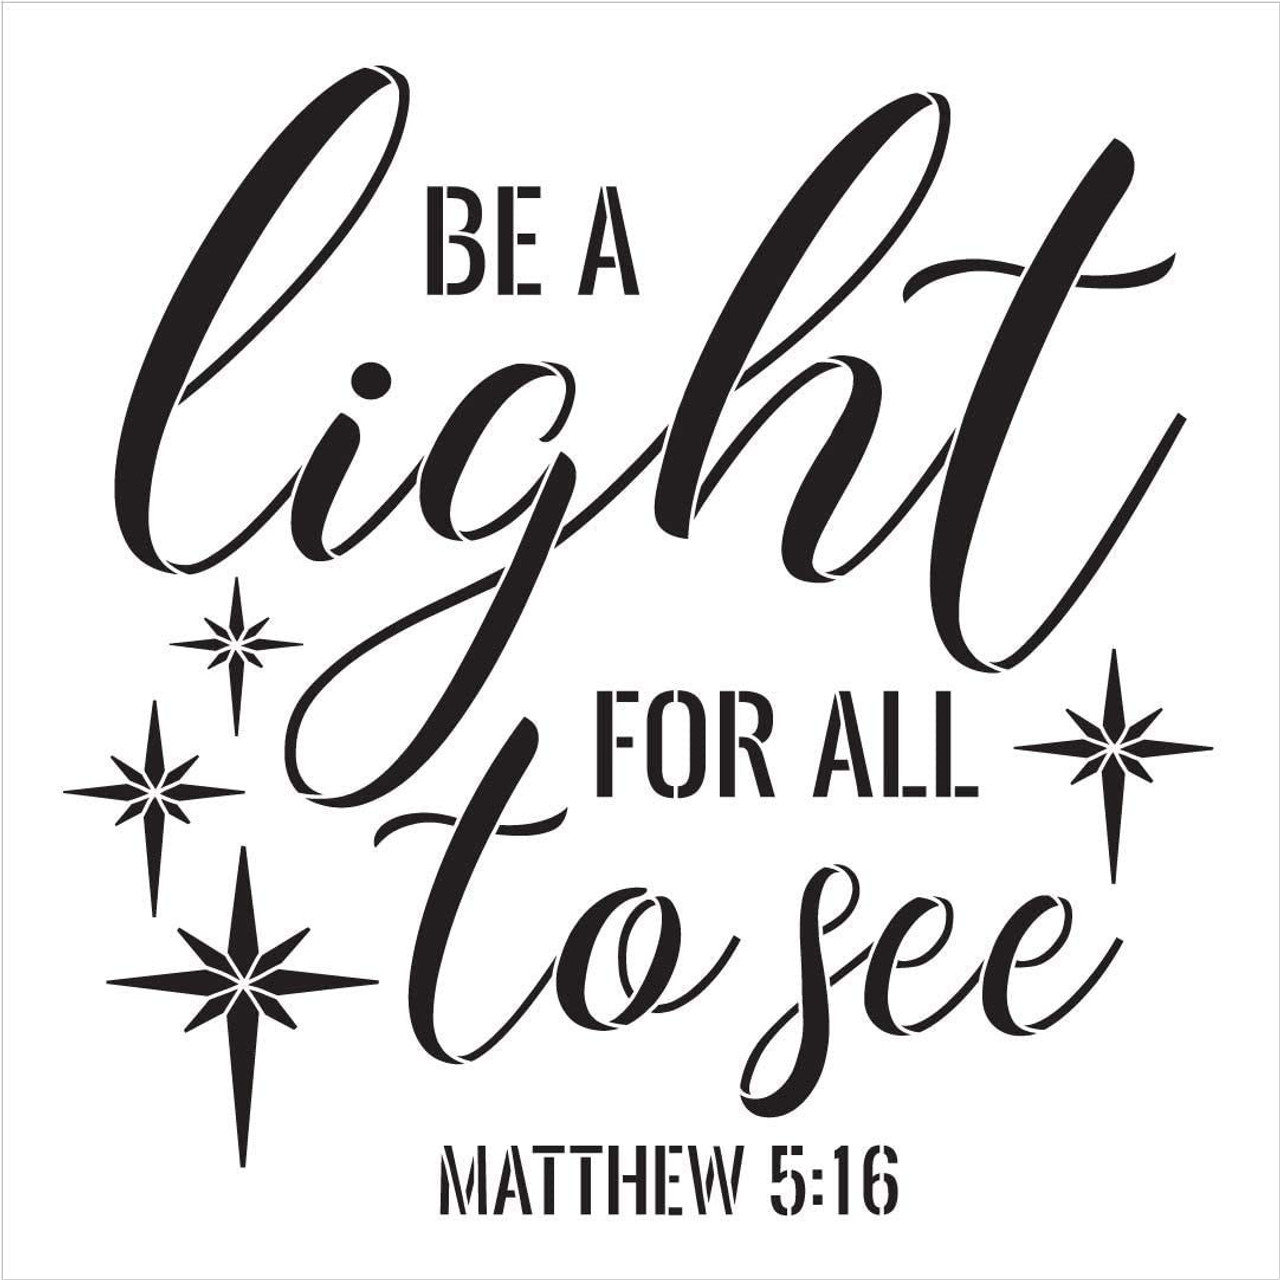 Be A Light for All to See Stencil by StudioR12 | DIY Bible Verse Faith Home Decor | Matthew 5:16 | Paint Wood Signs | Select Size